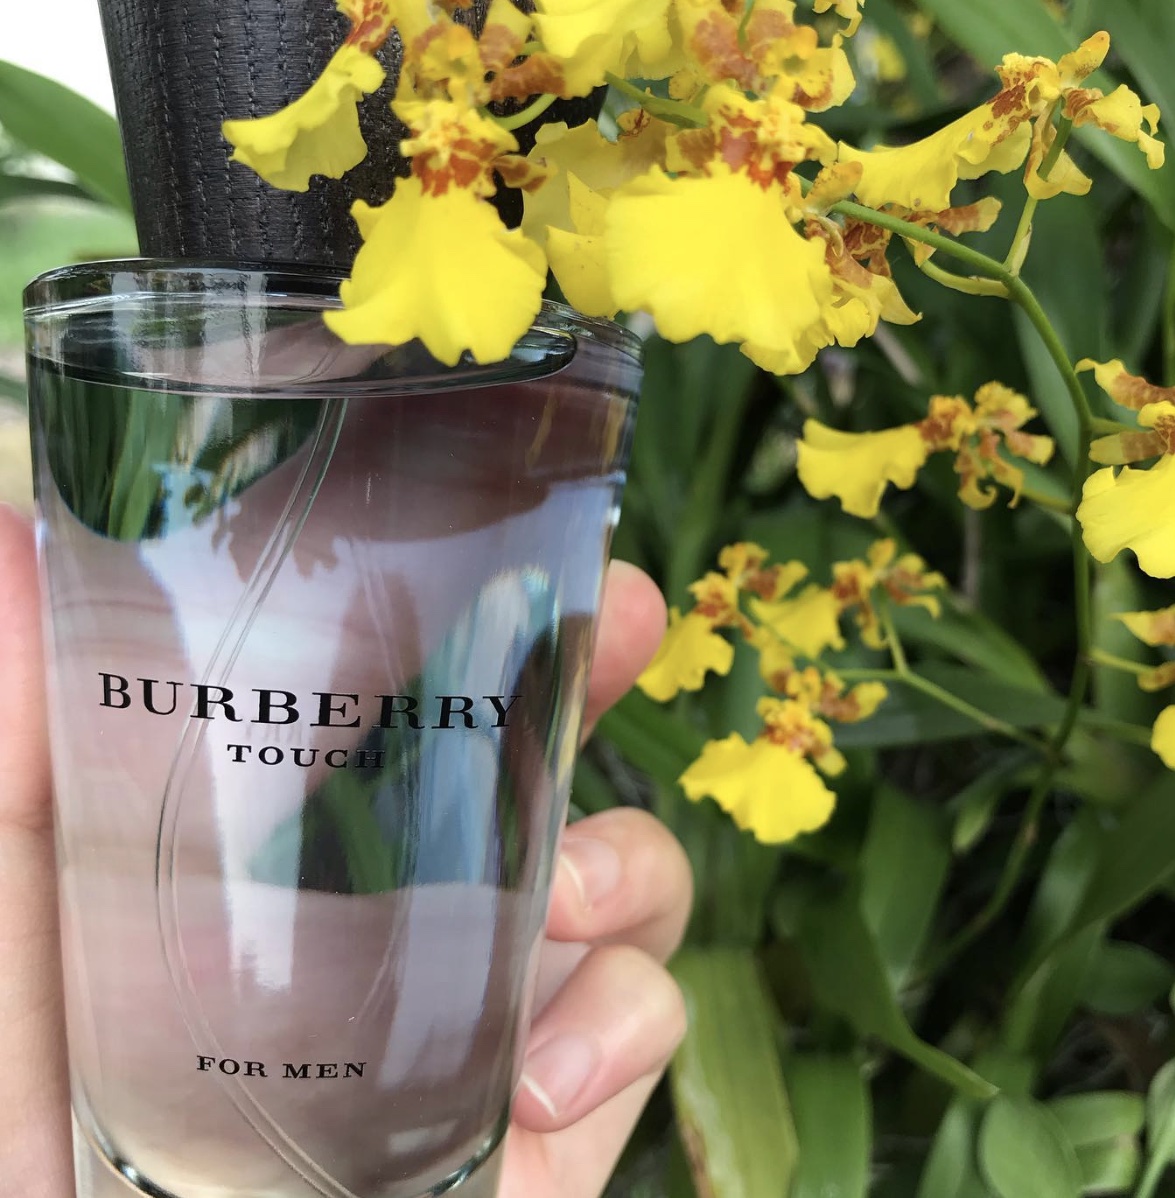 Burberry Touch beside a flowering plant